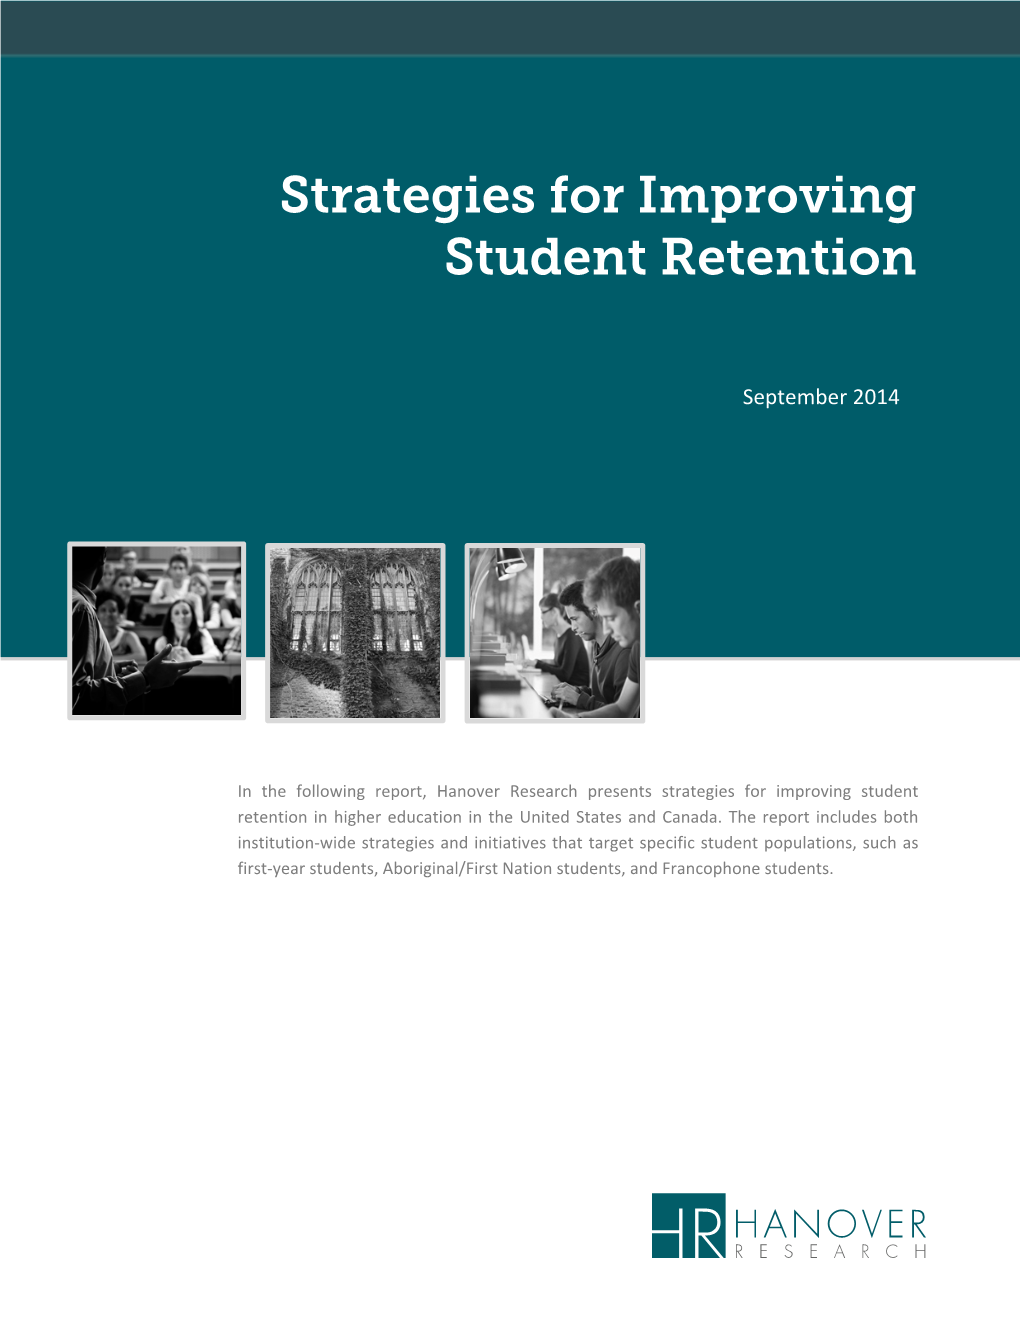 Strategies for Improving Student Retention in Higher Education in the United States and Canada